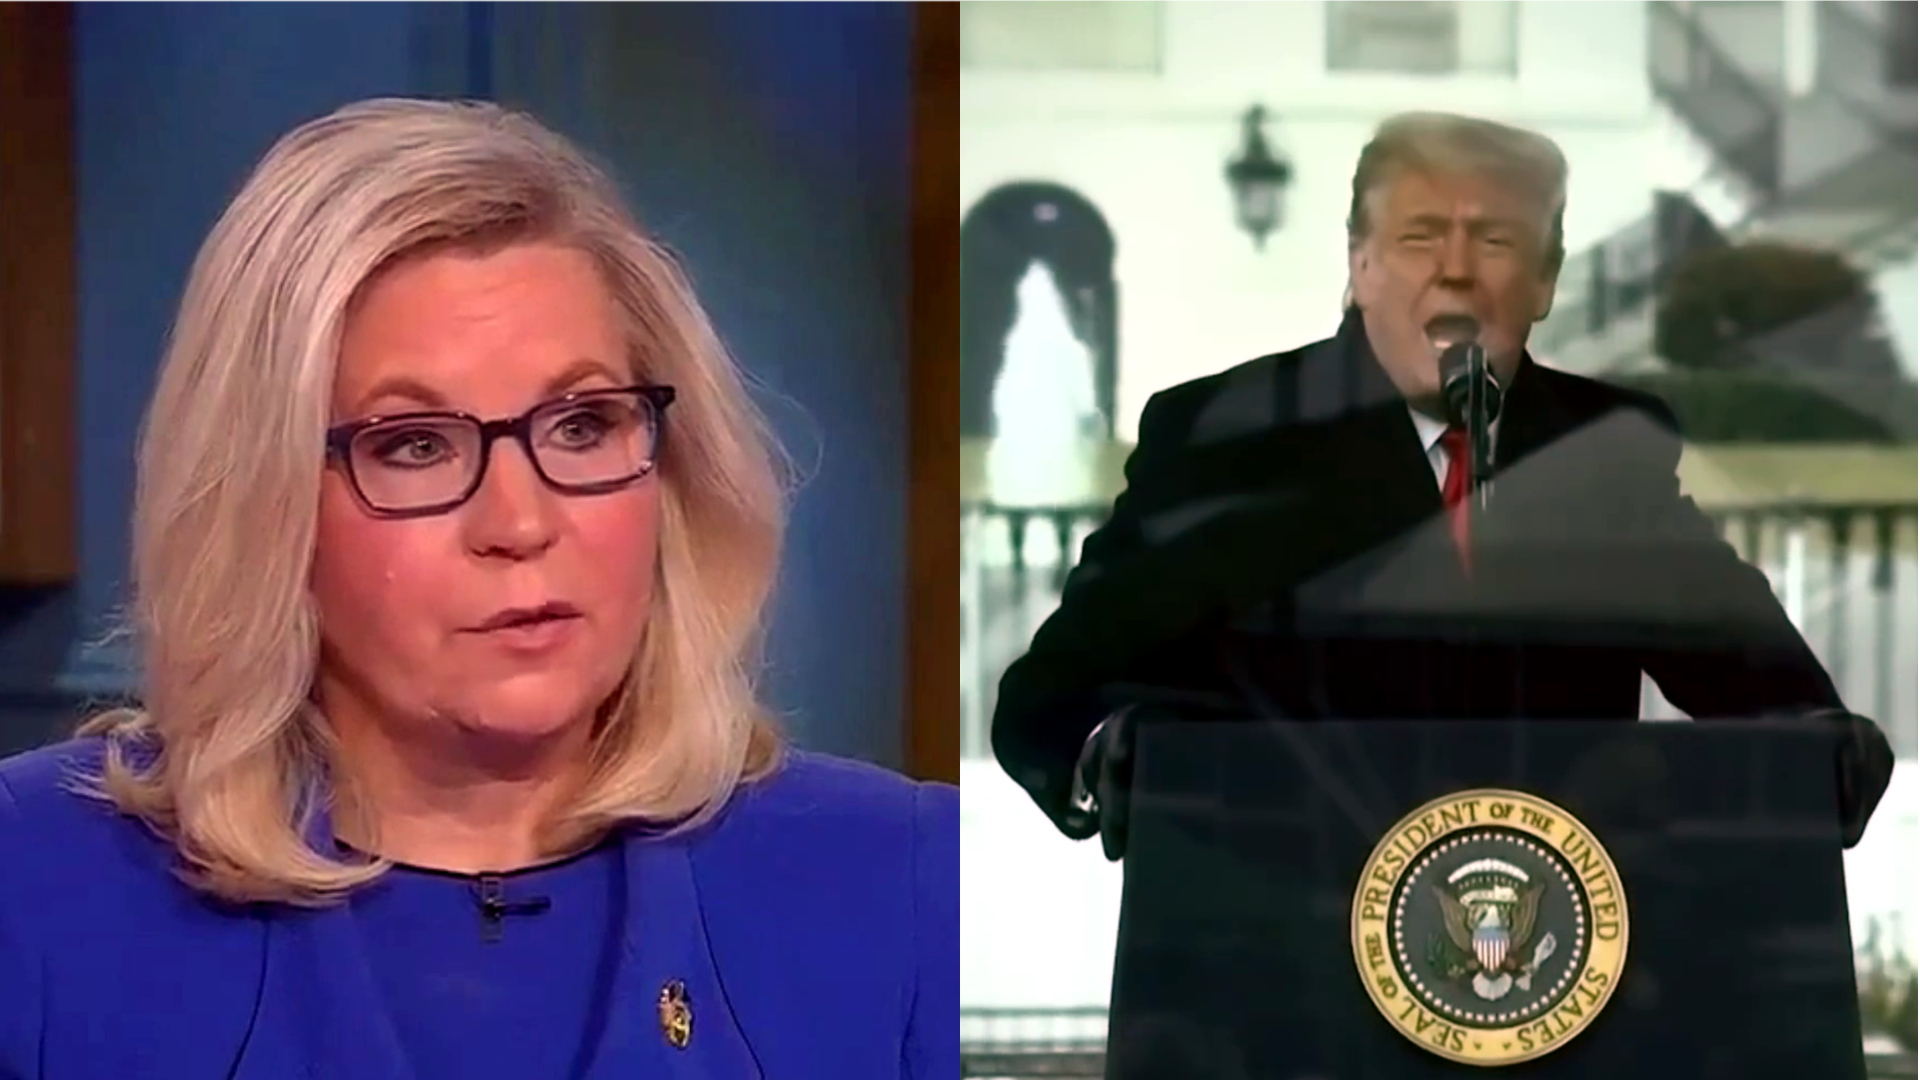 ‘SHOULD BE PROSECUTED!’ Trump Doubles Down On Call for Liz Cheney to Be Jailed, Ex-Congresswoman Fires Back